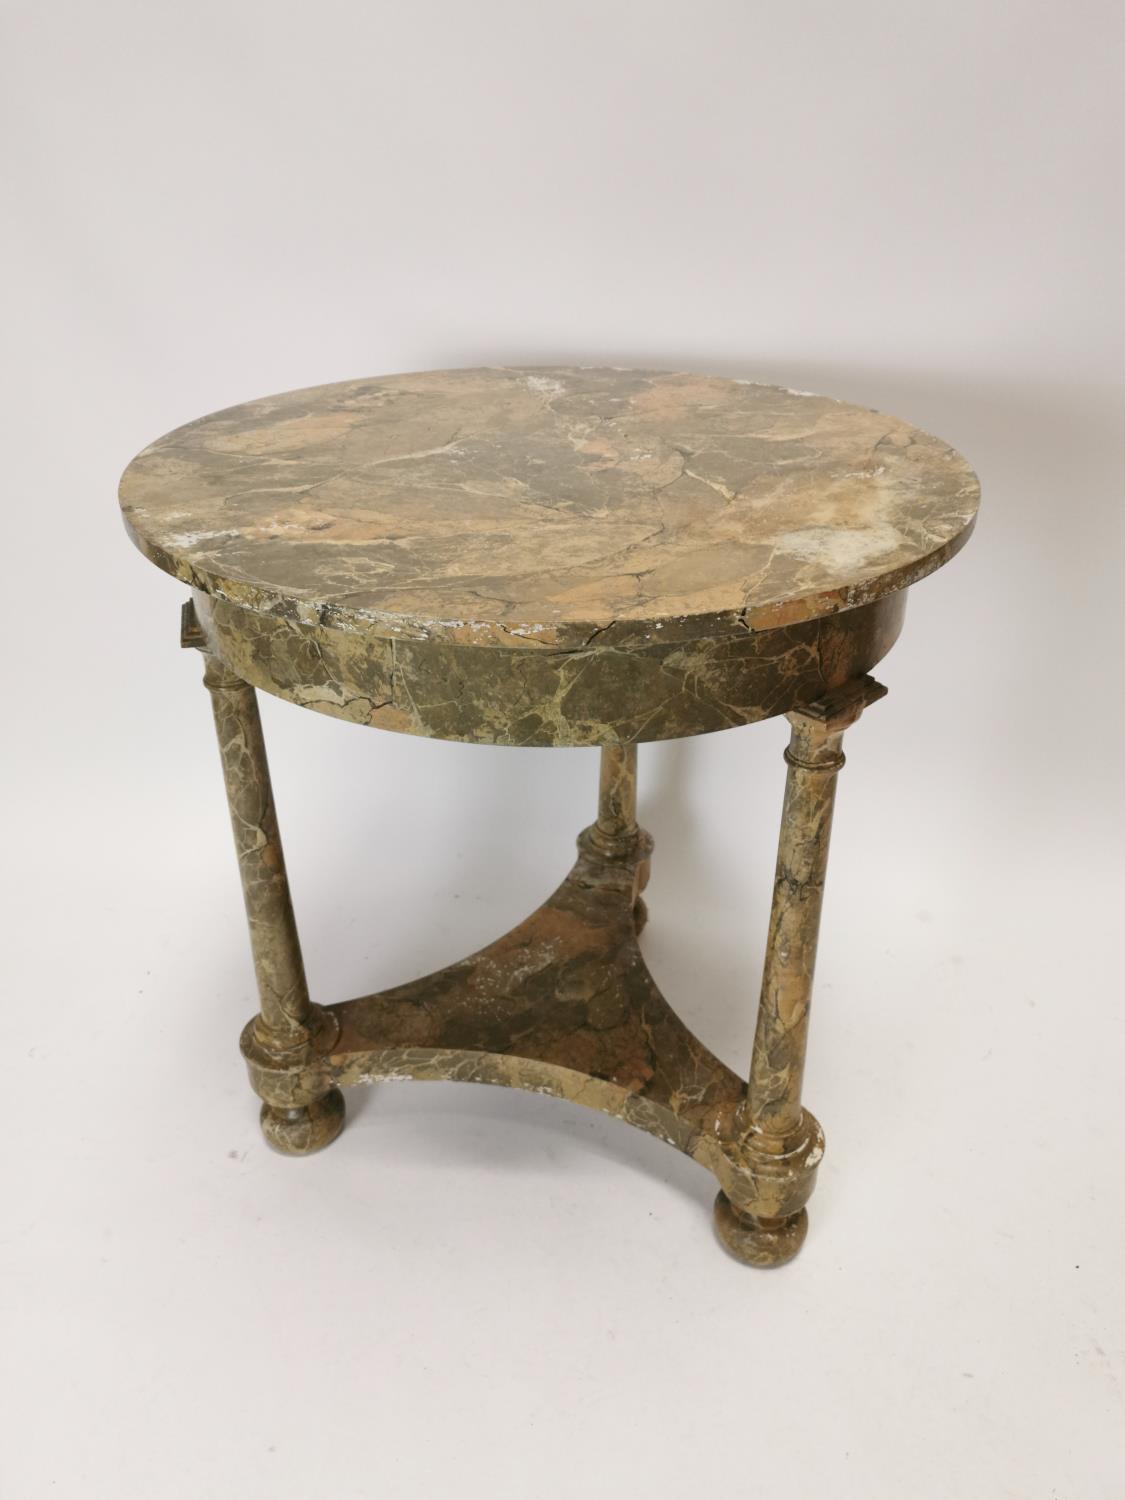 Late 19th C. marbleised pine centre table on turned legs {70 cm H x 85 cm Dia}.